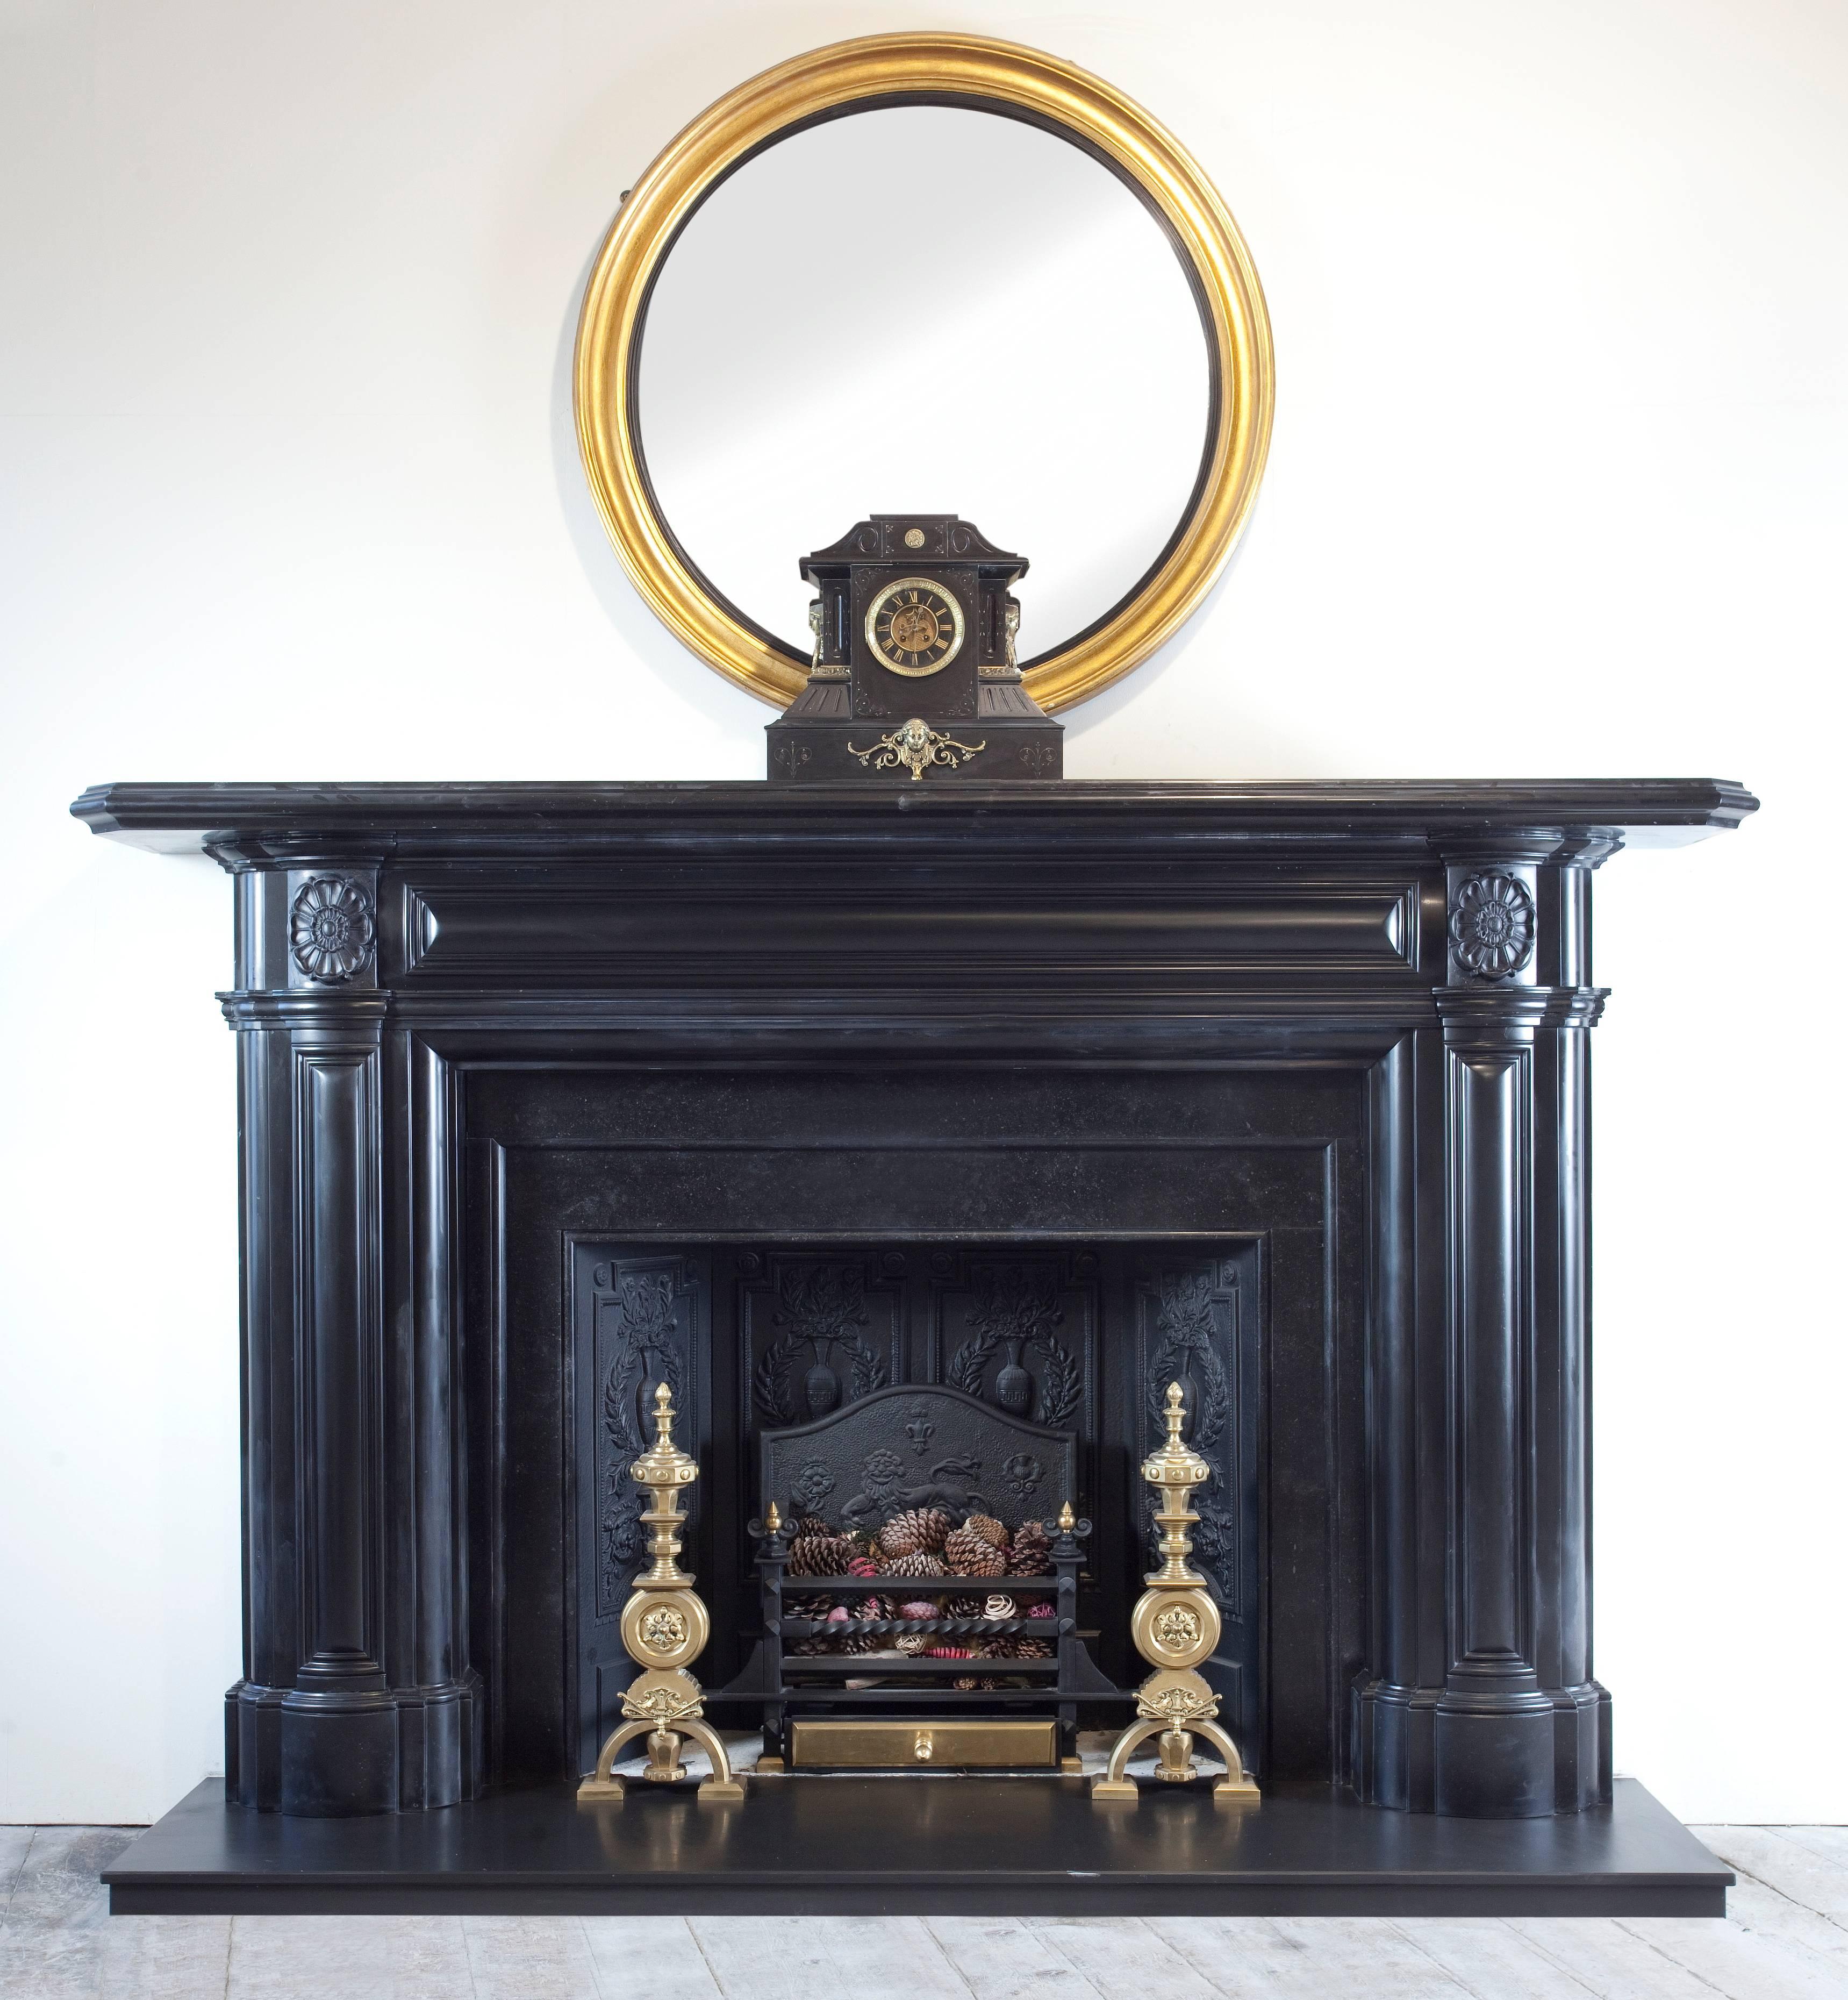 Impressive 19th century Victorian carved Irish black marble fire surround originating from Necarne Castle, Irvinestown, County Fermanagh. 

Aperture measurements:
Width 60 inches
Height 48 inches

The fire surround is shown with new Irish